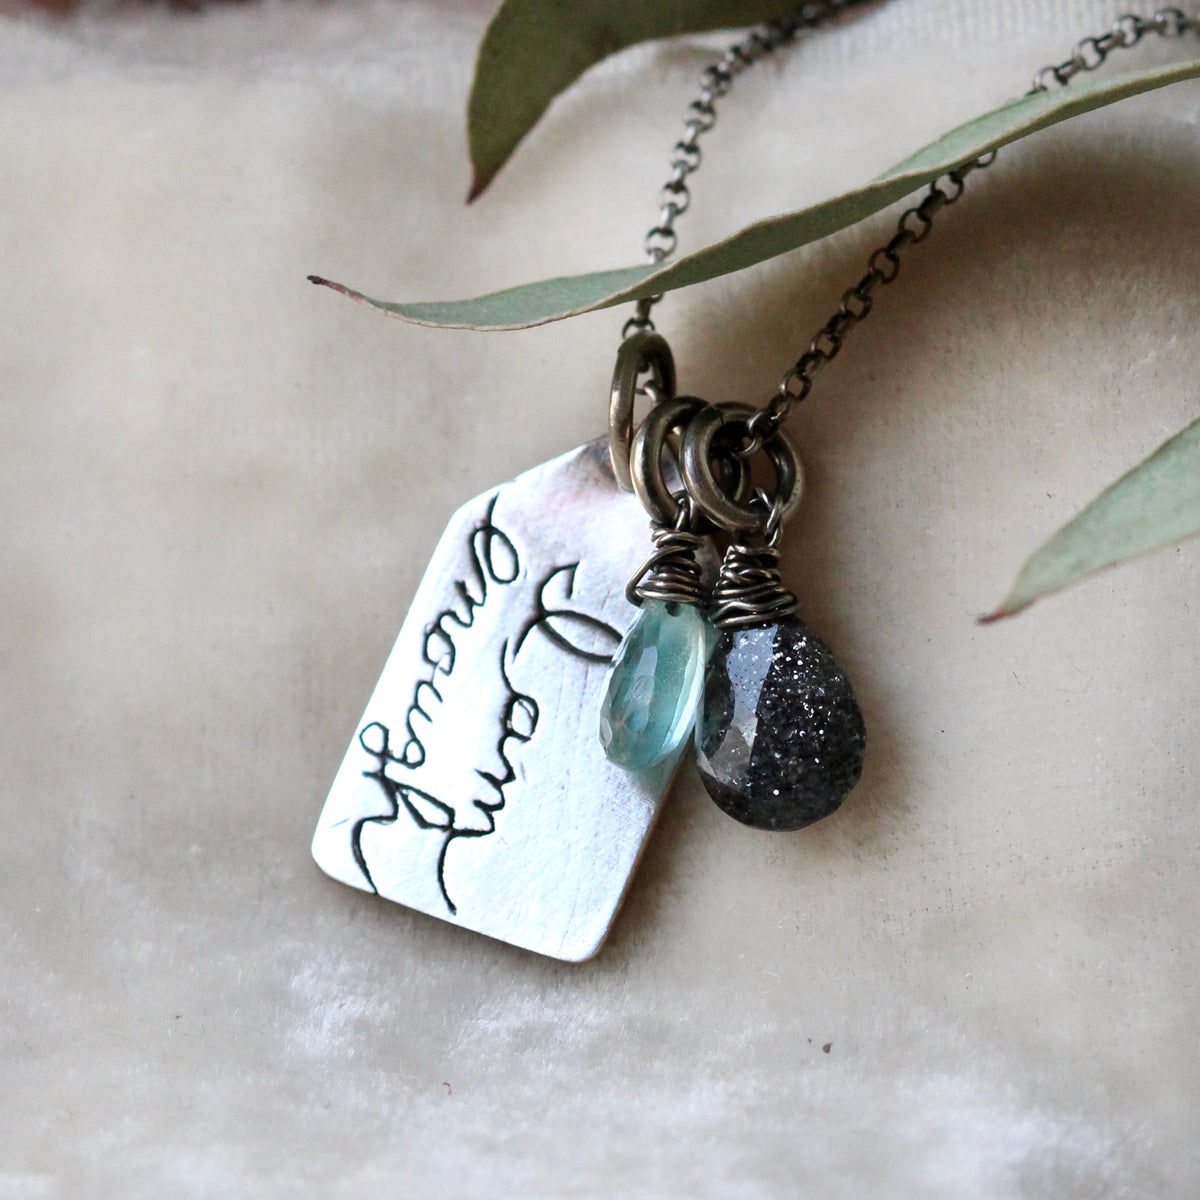 Clearance Sale I am Enough Necklace sterling and gemstones